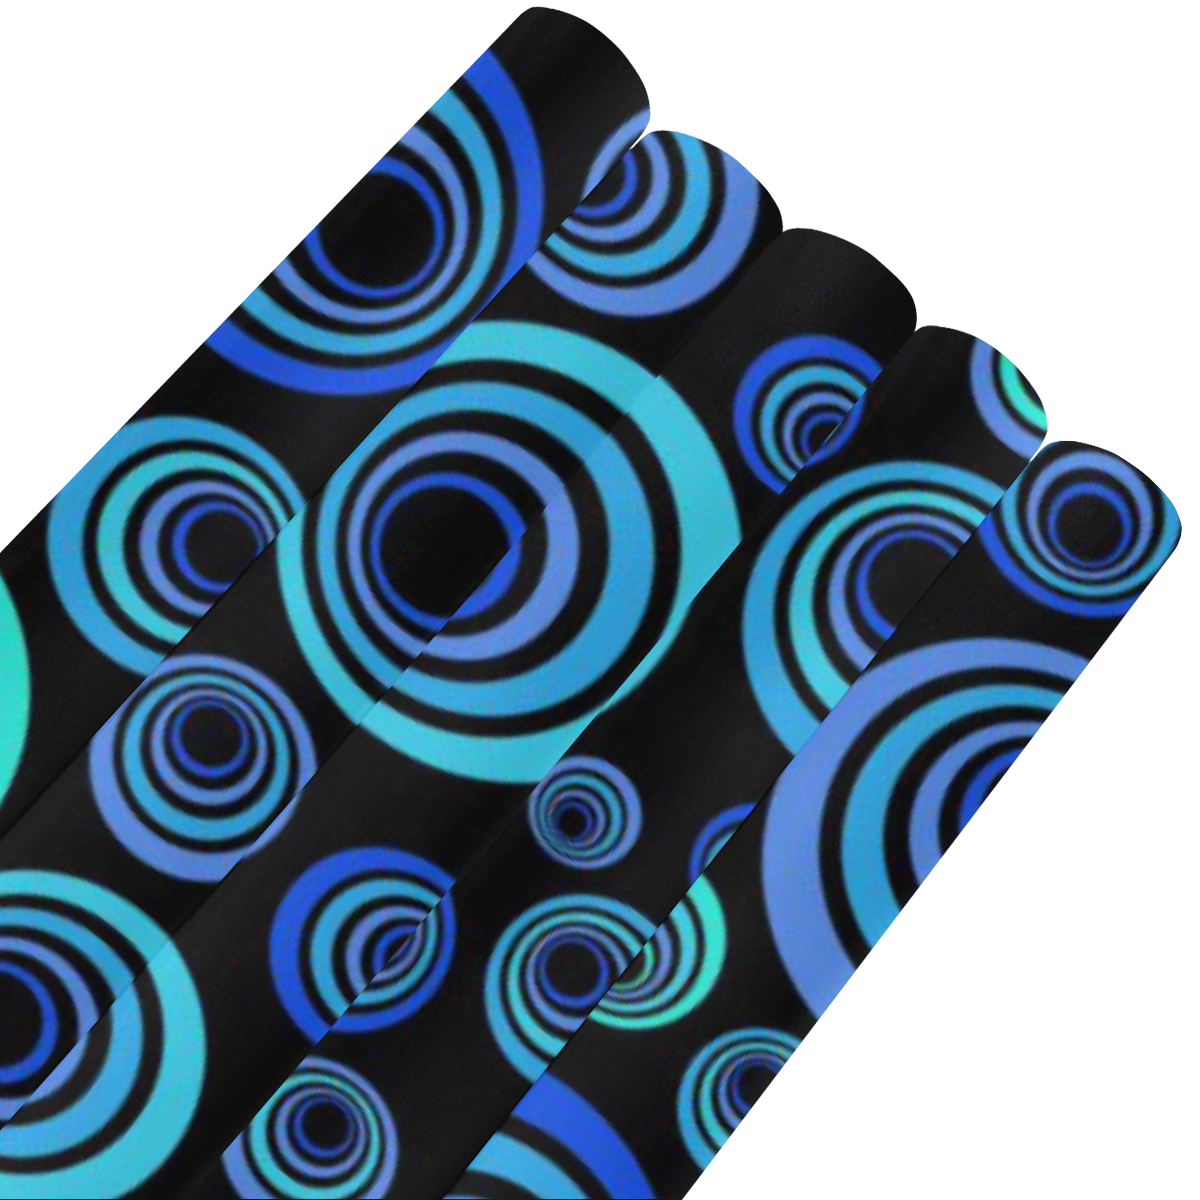 Retro Psychedelic Pretty Blue Pattern Gift Wrapping Paper 58"x 23" (5 Rolls)